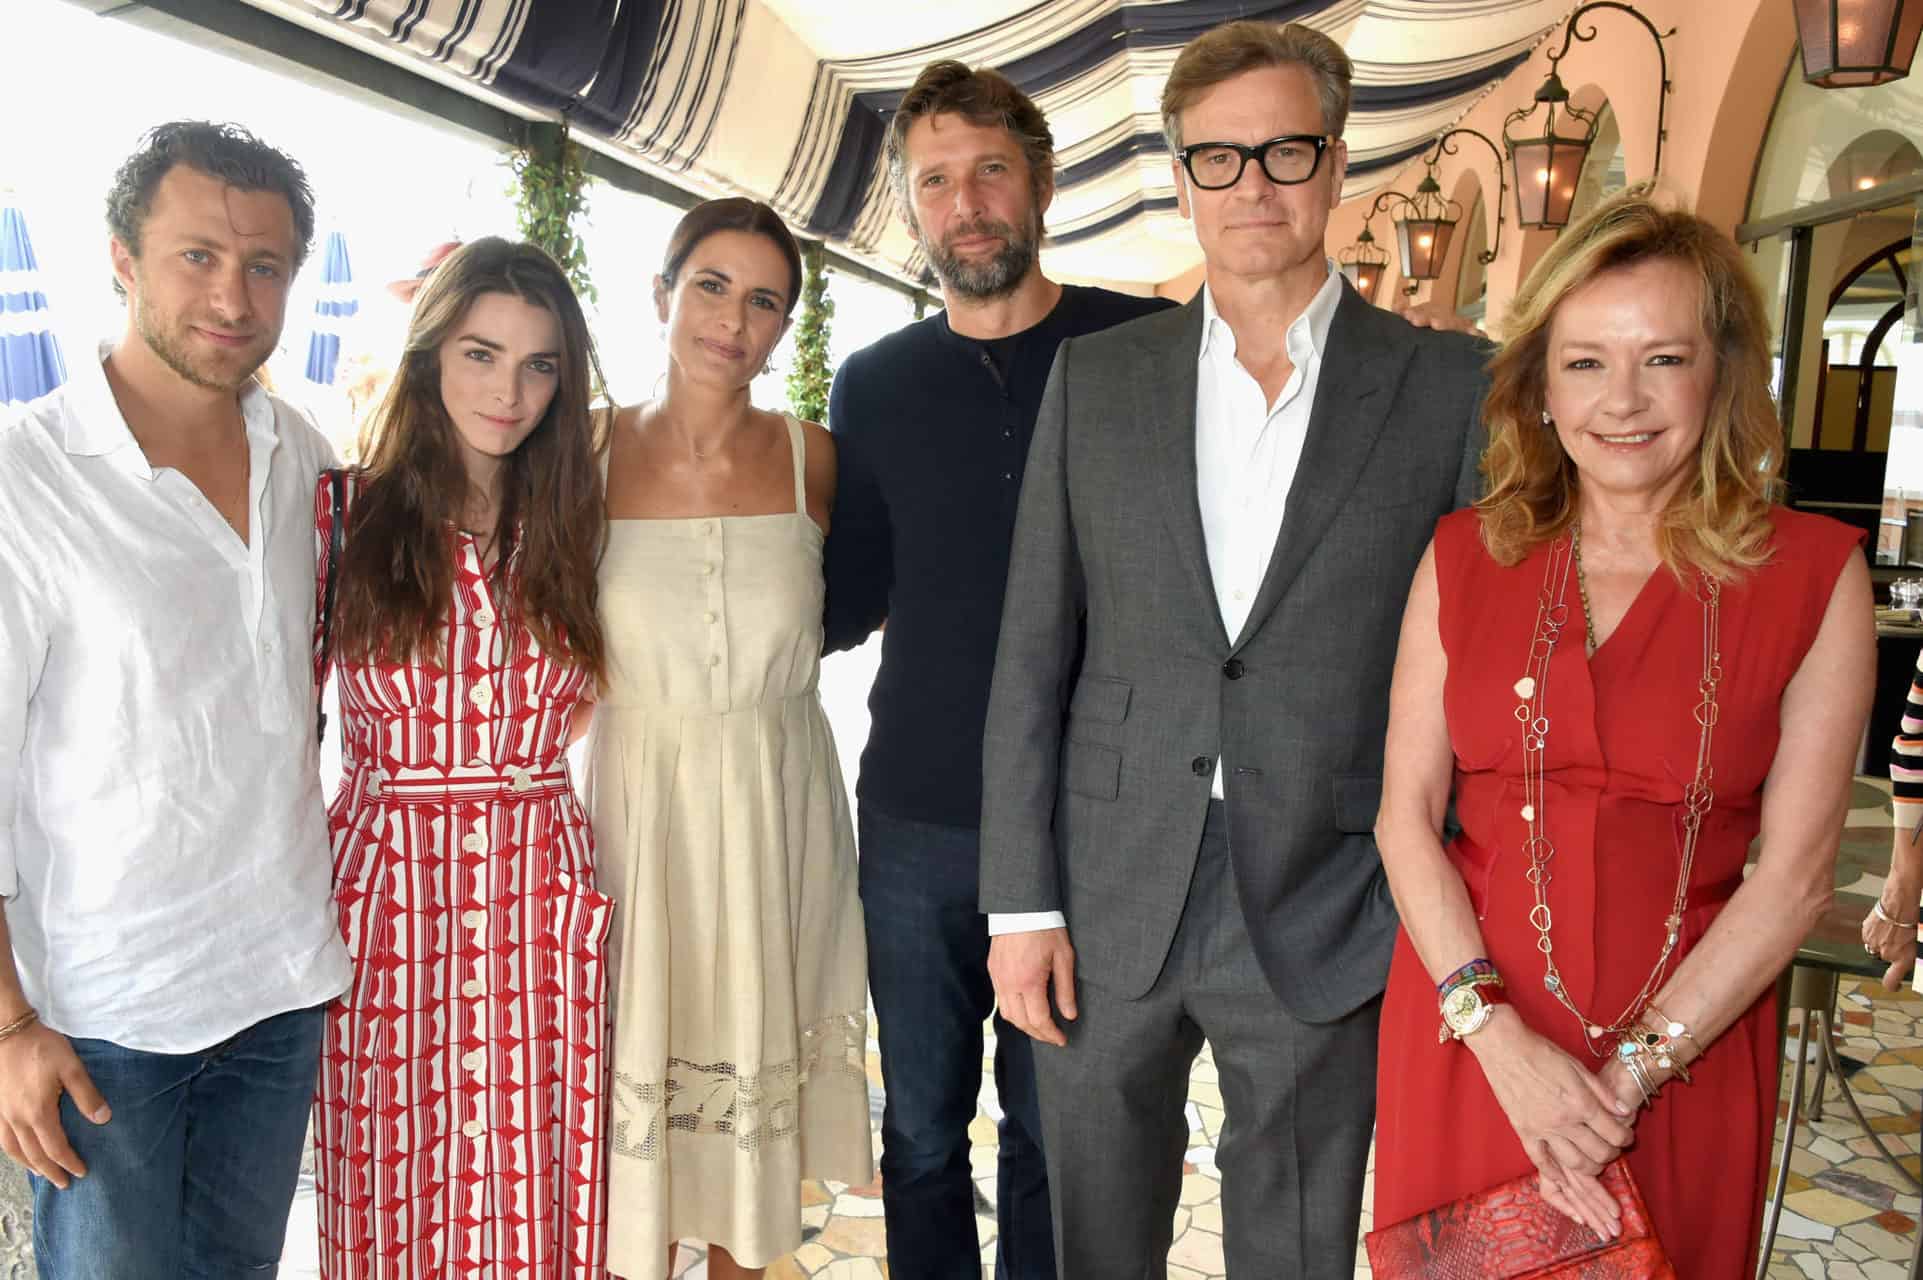 VENICE, ITALY - SEPTEMBER 01: (L-R) Francesco Carrozzini, Bee Shaffer, Livia Firth, a guest, Colin Firth and Caroline Scheufele attend an intimate lunch hosted by Livia Firth, Carlo Capasa and Caroline Scheufele to announce Chopard as partner for The Green Carpet Fashion Awards at Hotel Cipriani on September 1, 2017 in Venice, Italy. (Photo by David M. Benett/Getty Images for Eco-Age) *** Local Caption *** Francesco Carrozzini; Bee Shaffer; Livia Firth; Colin Firth; Caroline Scheufele